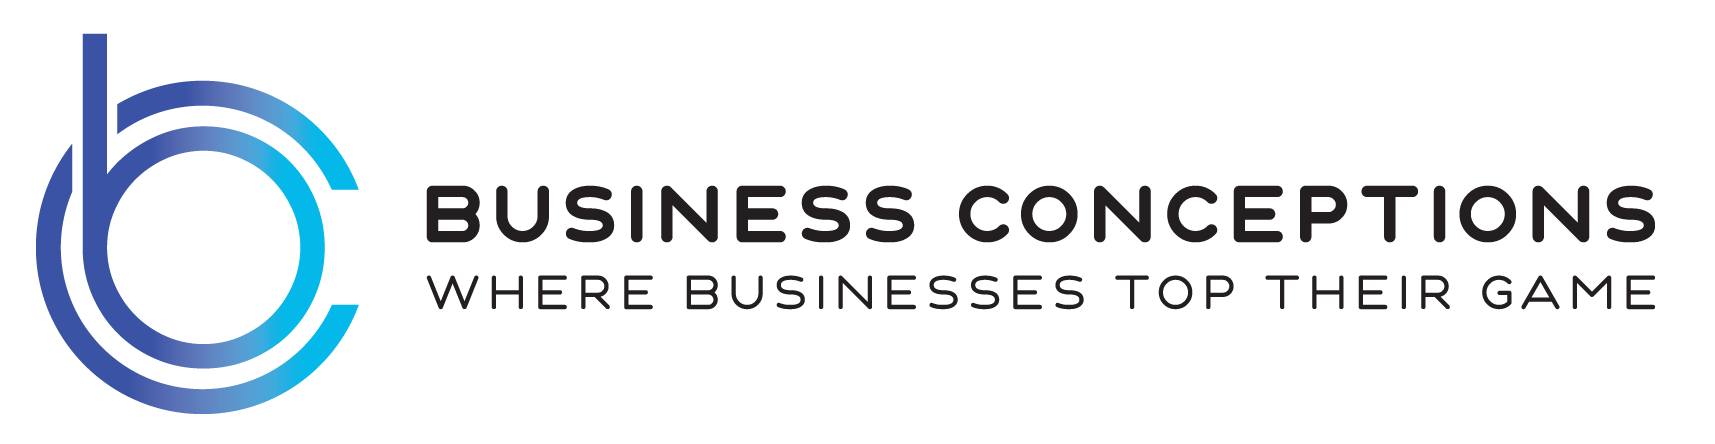 Business Conceptions